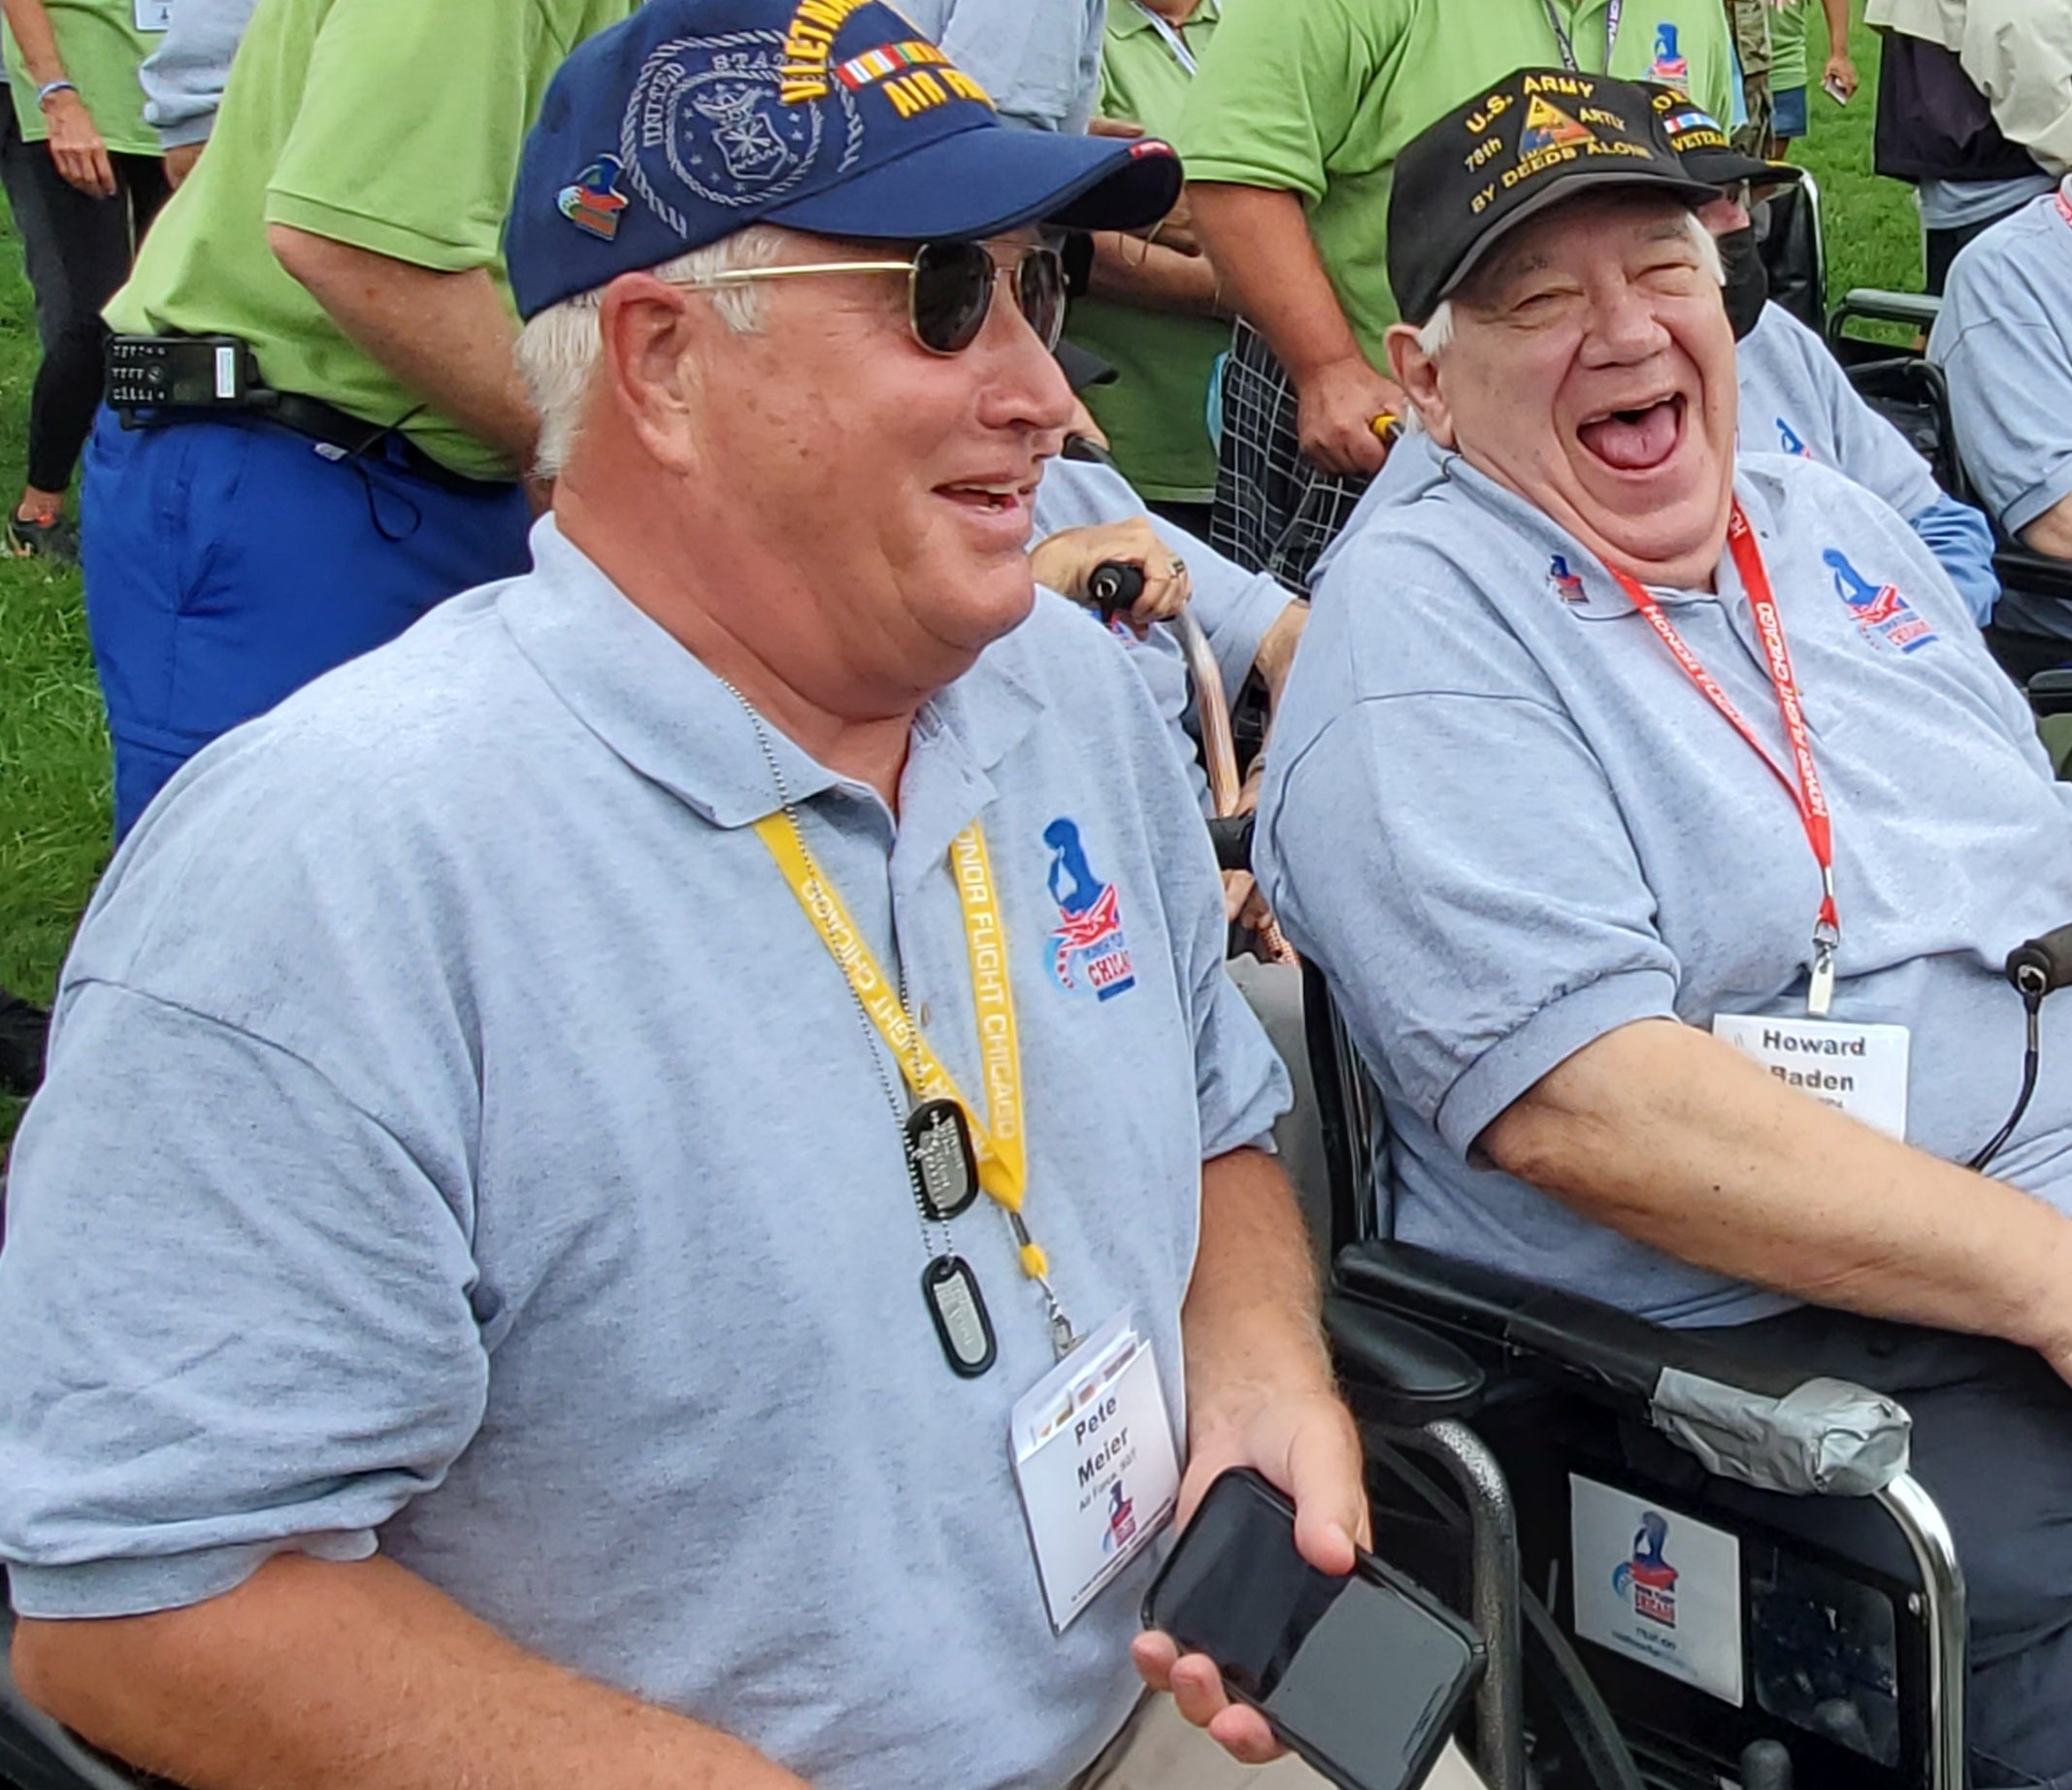 On Armed Forces Day, Honor Flight Network receives stunning donation from Mission BBQ